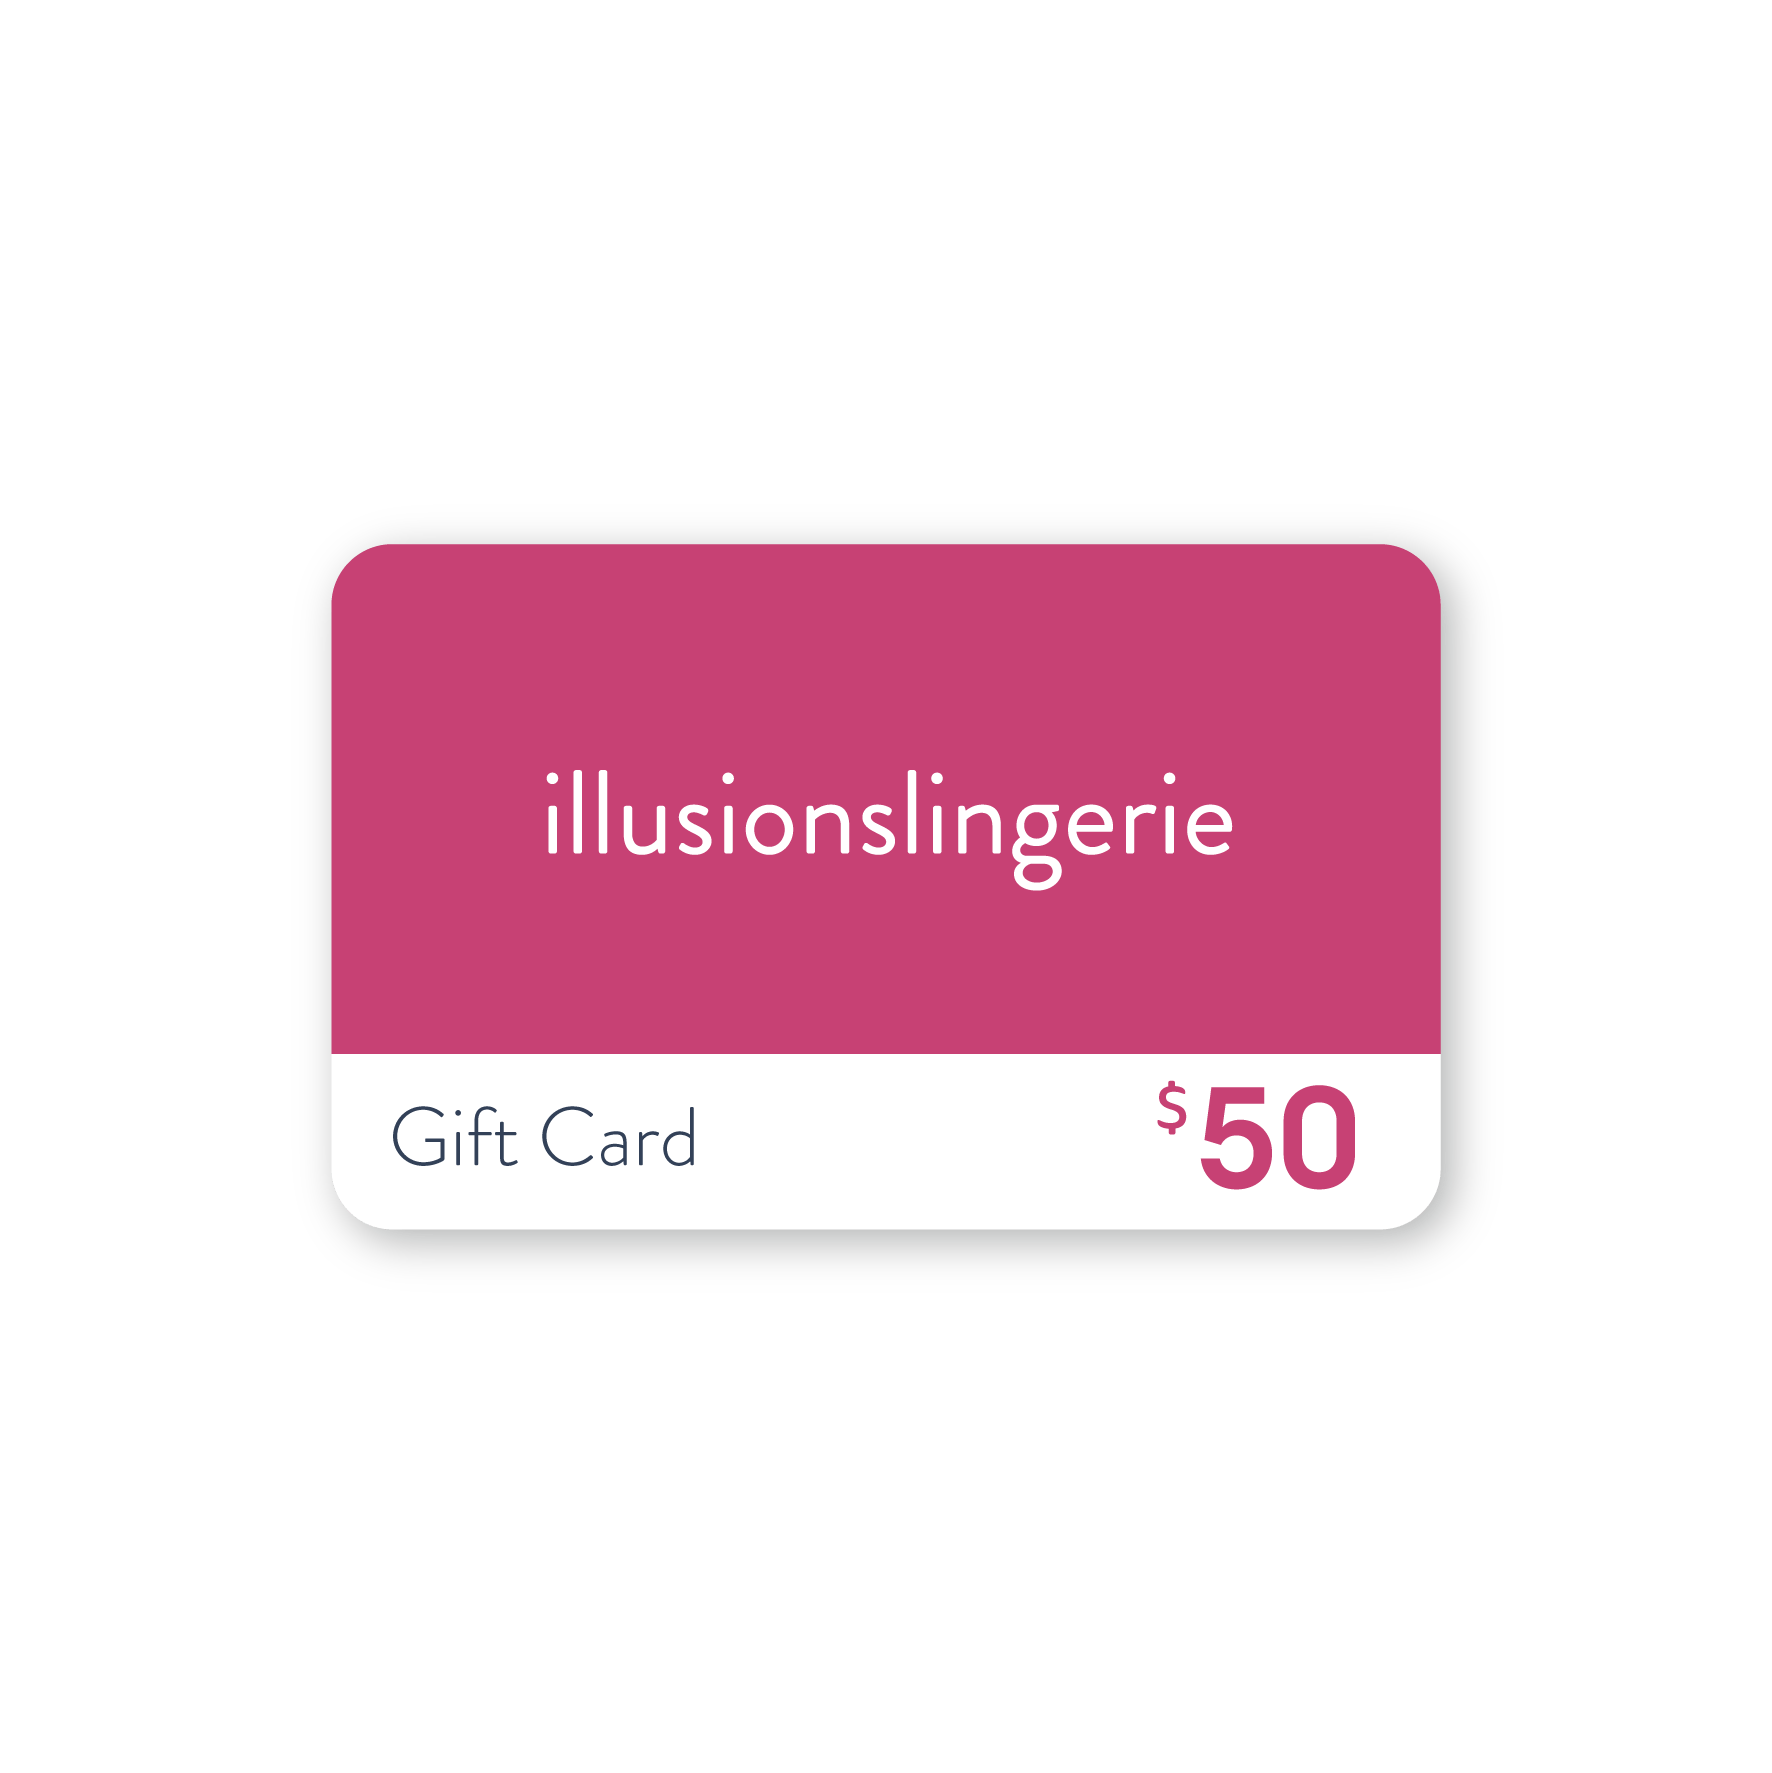 Illusions Lingerie Gift Card $50 Digital Gift Card - Illusions Lingerie from Illusions Lingerie in Melbourne